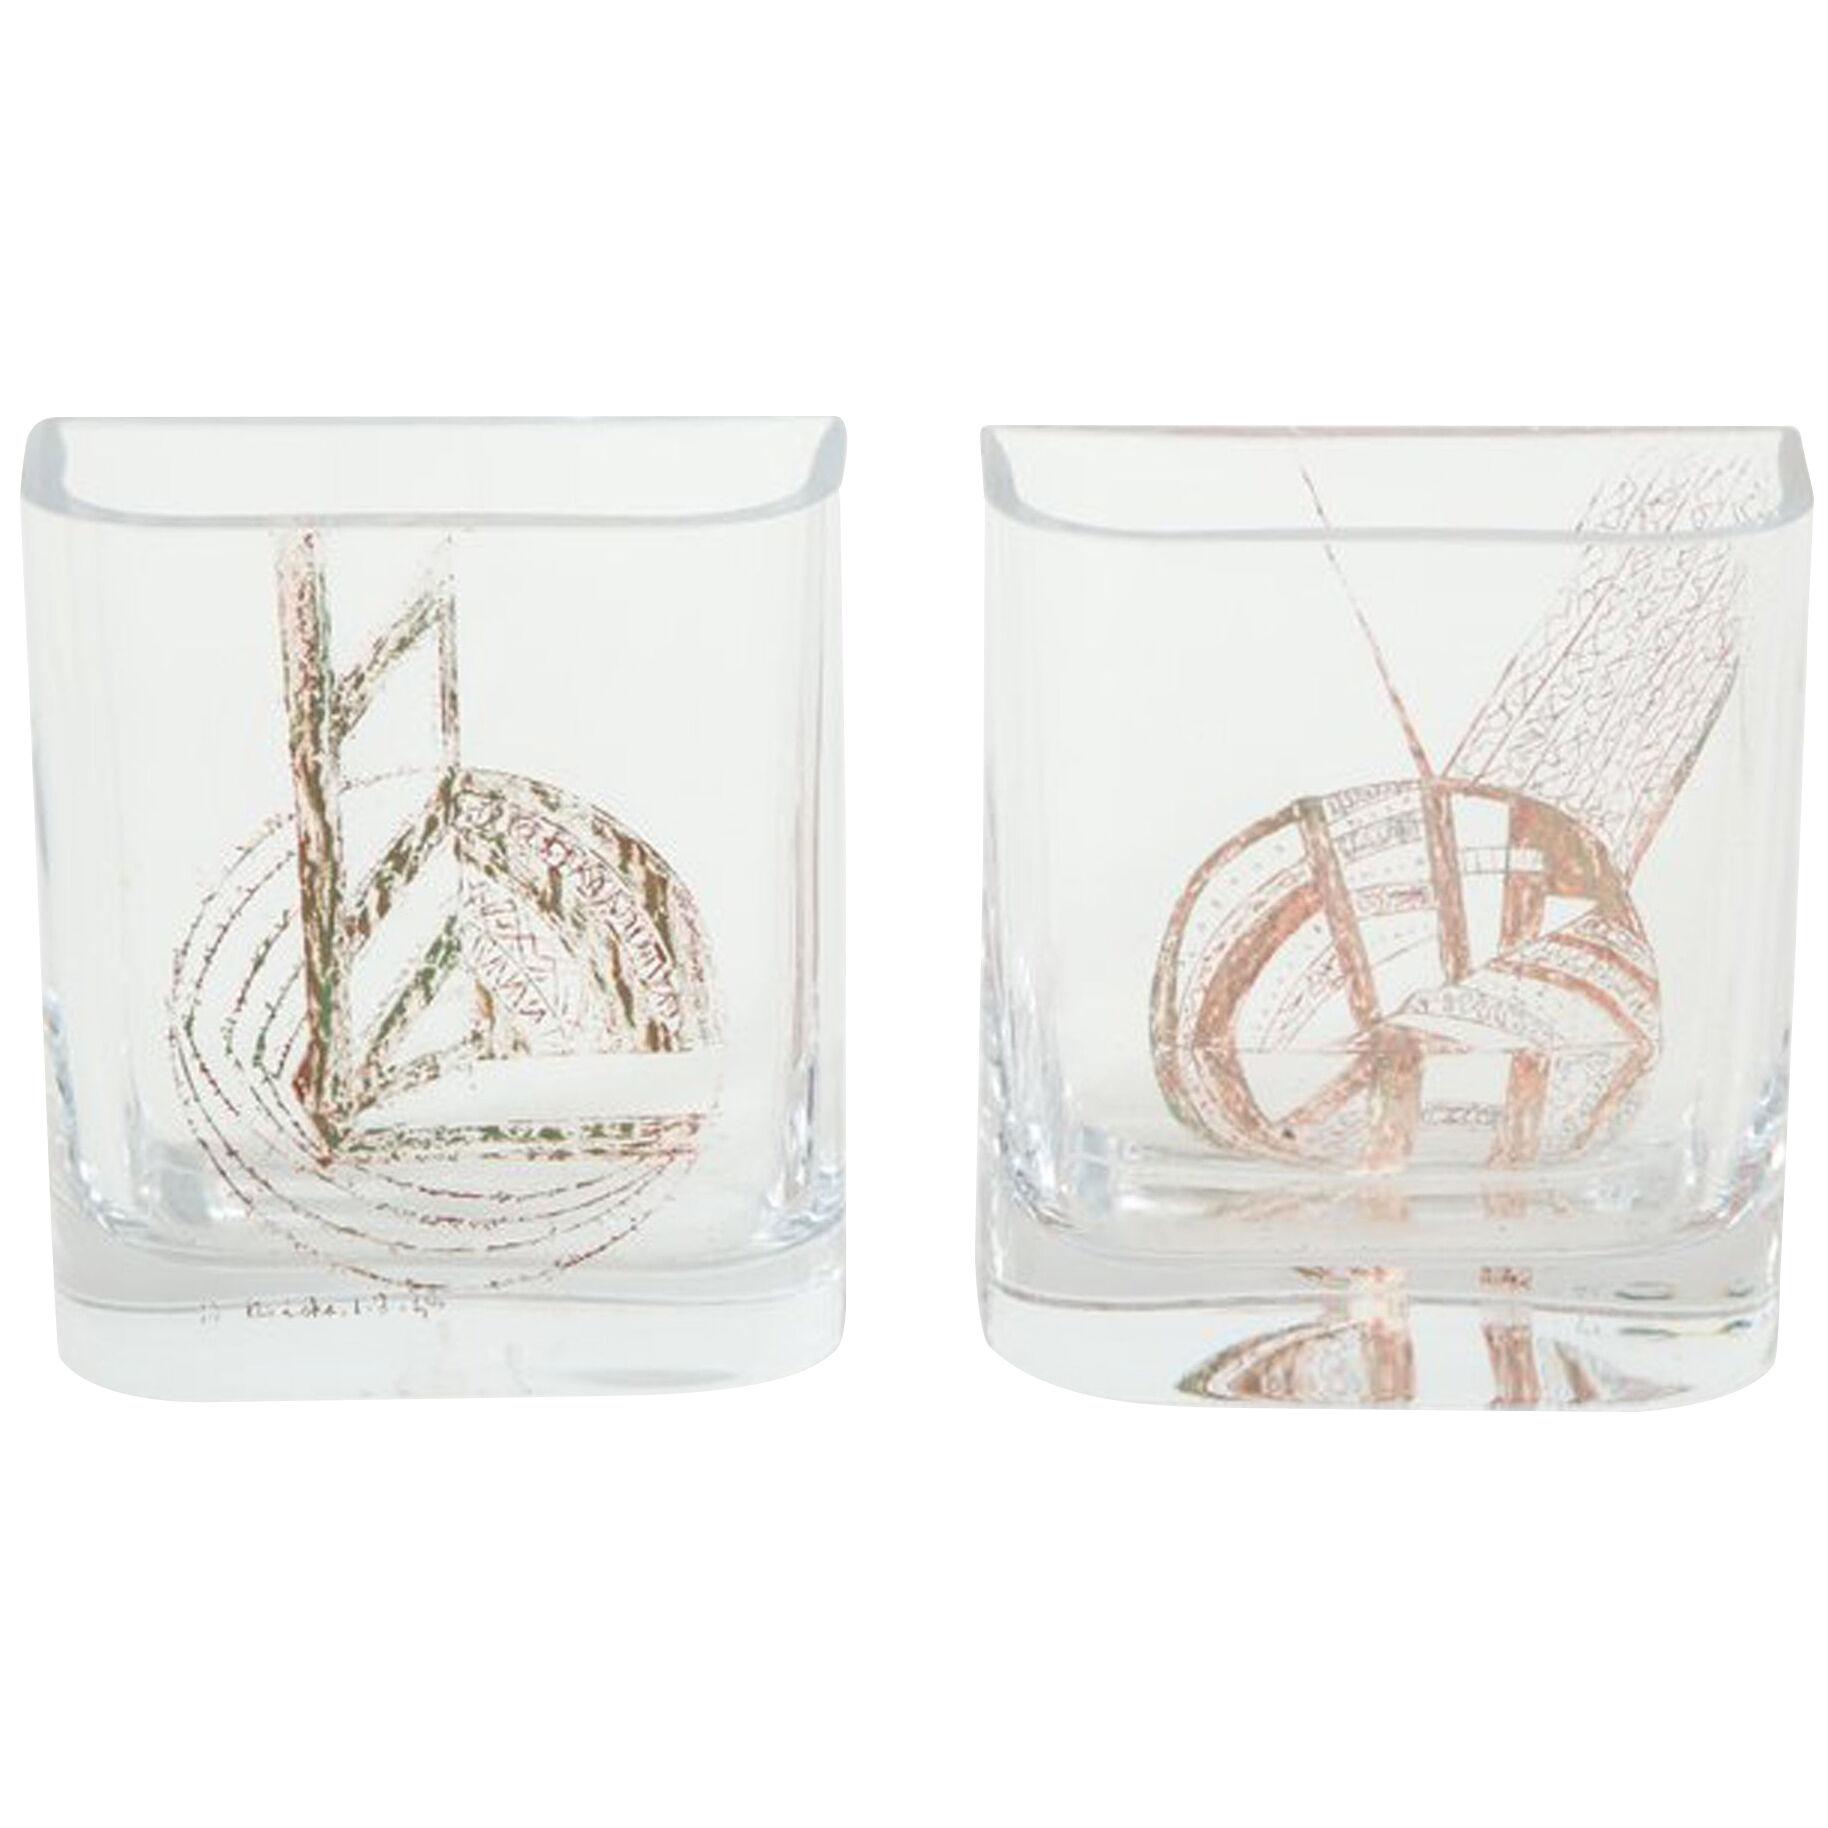 Pair of Etched Glass Vases